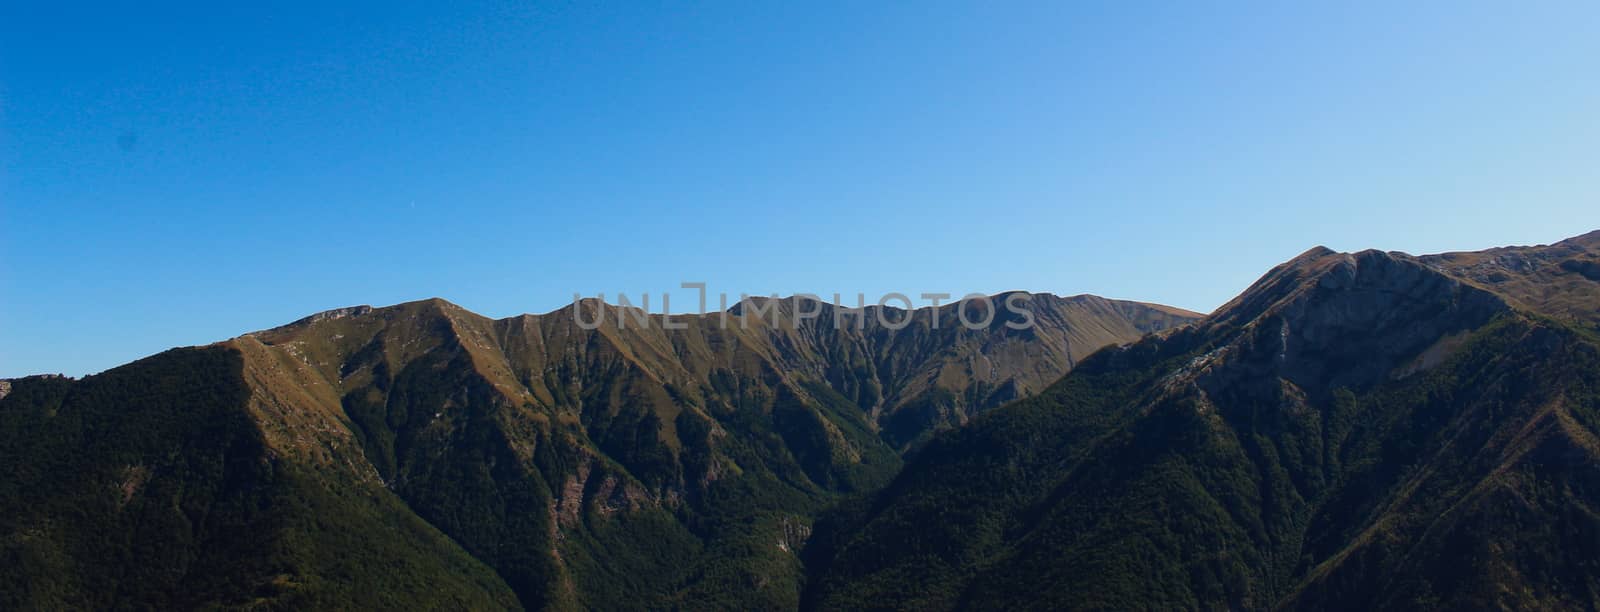 Banner of mountain peaks on Bjelasnica mountain in autumn, with cloudless blue sky in the background. Next to the old Bosnian village of Lukomir. Bjelasnica Mountain, Bosnia and Herzegovina.